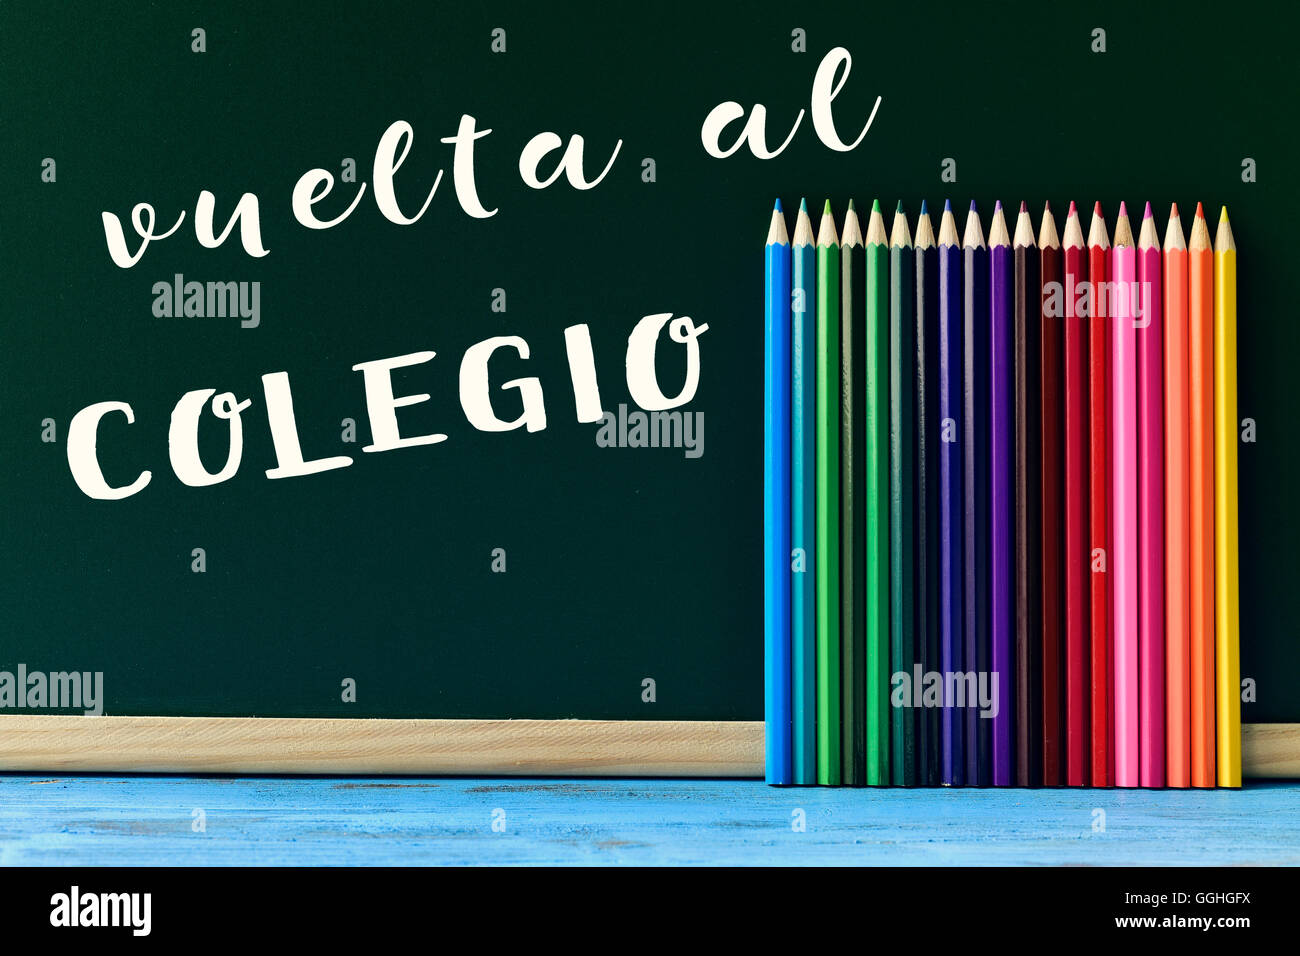 text vuelta al colegio, back to school in spanish written in a chalkboard and some new pencil crayons of different colors put in Stock Photo